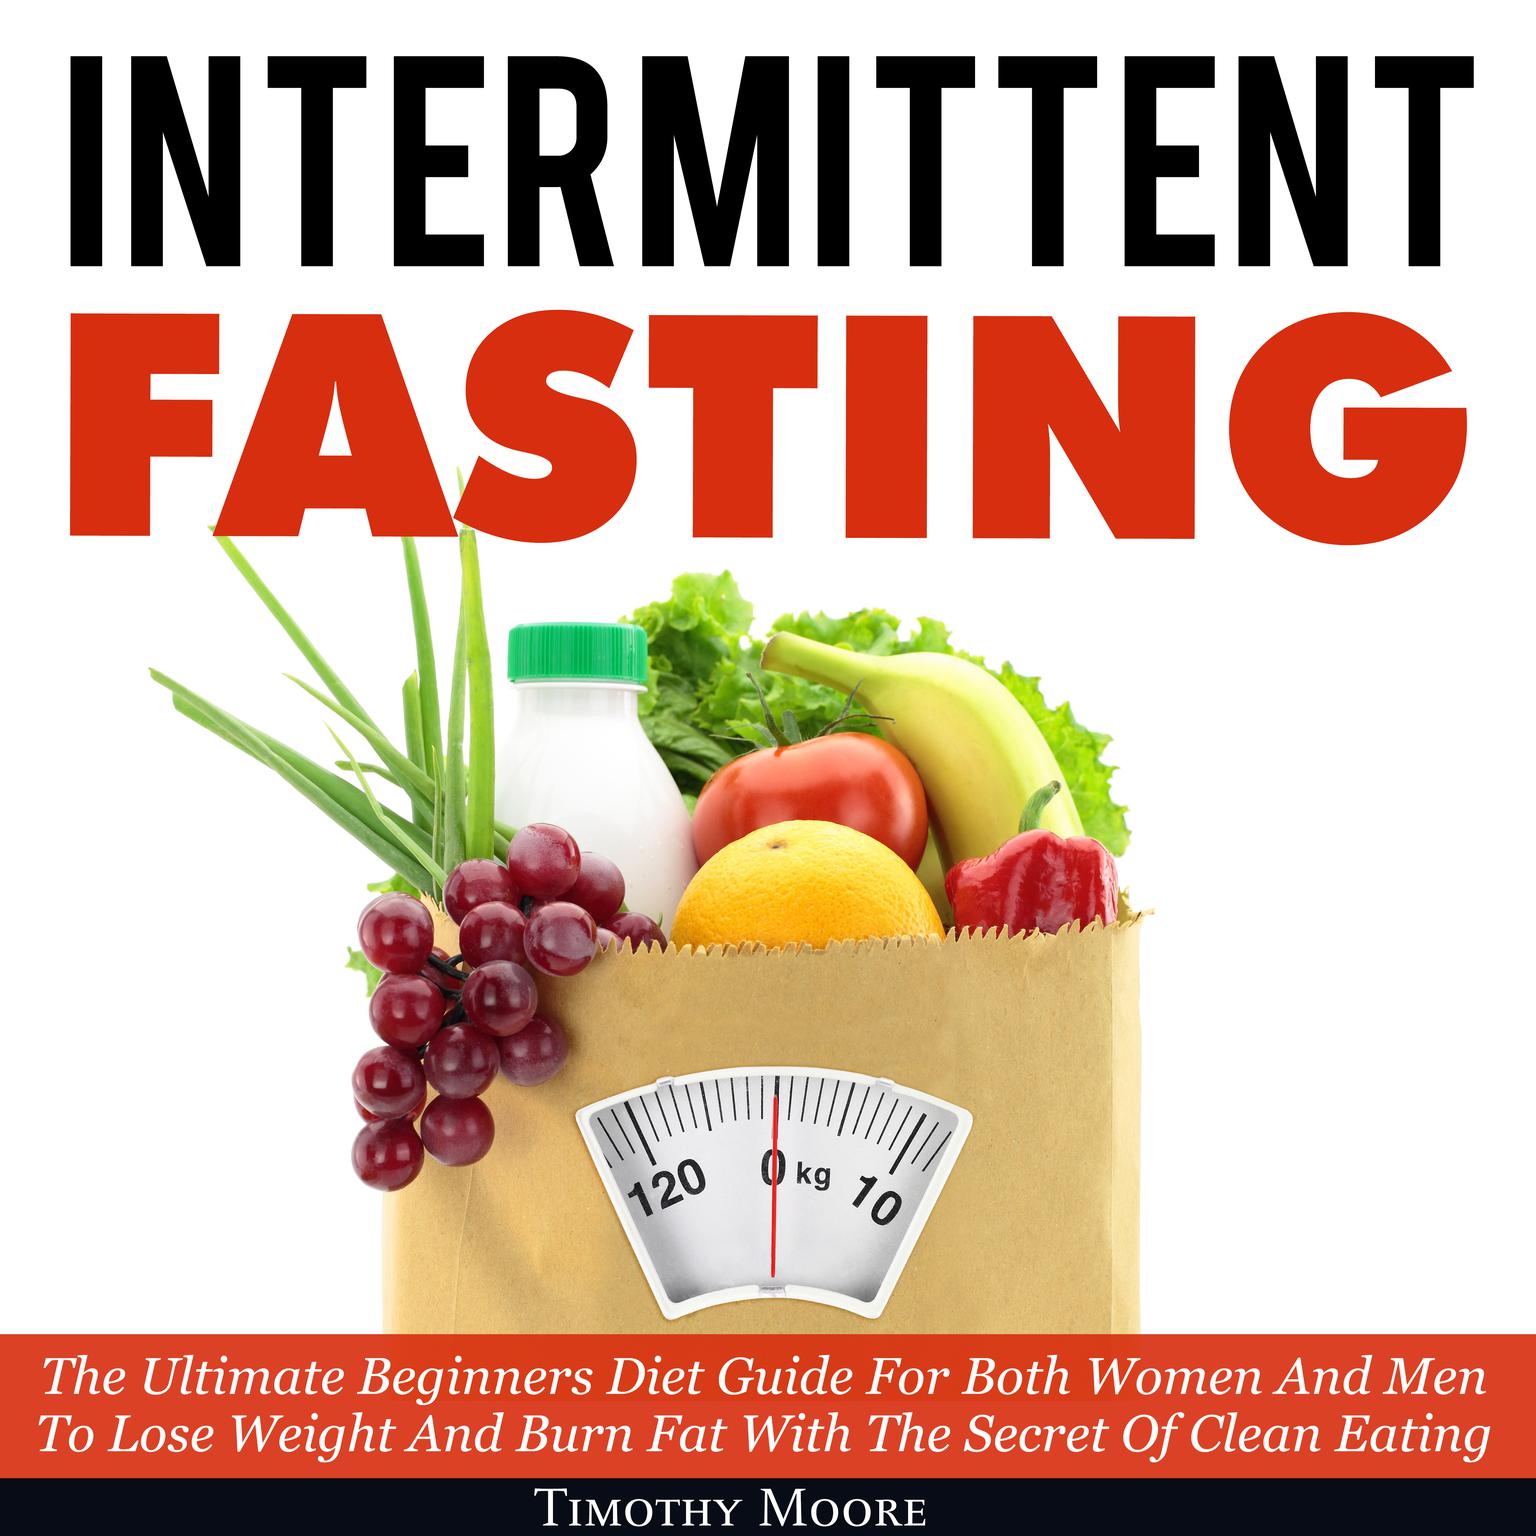 Intermittent Fasting: The Ultimate Beginners Diet Guide For Both Women And Men To Lose Weight And Burn Fat With The Secret Of Clean Eating Audiobook, by Timothy Moore